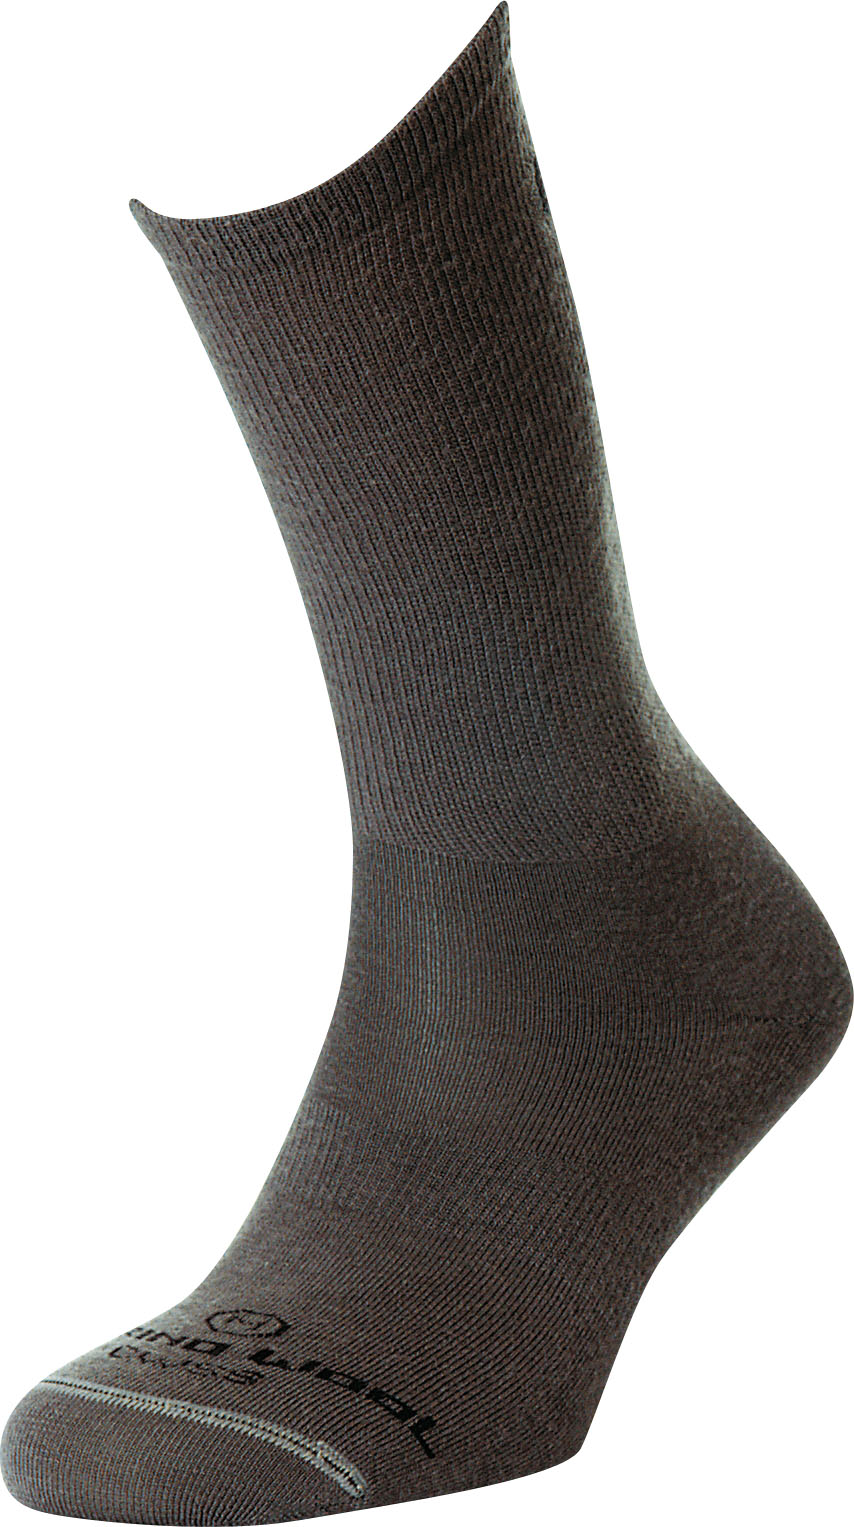 Image CWSS - Cold Weather Socks System - Brown - L